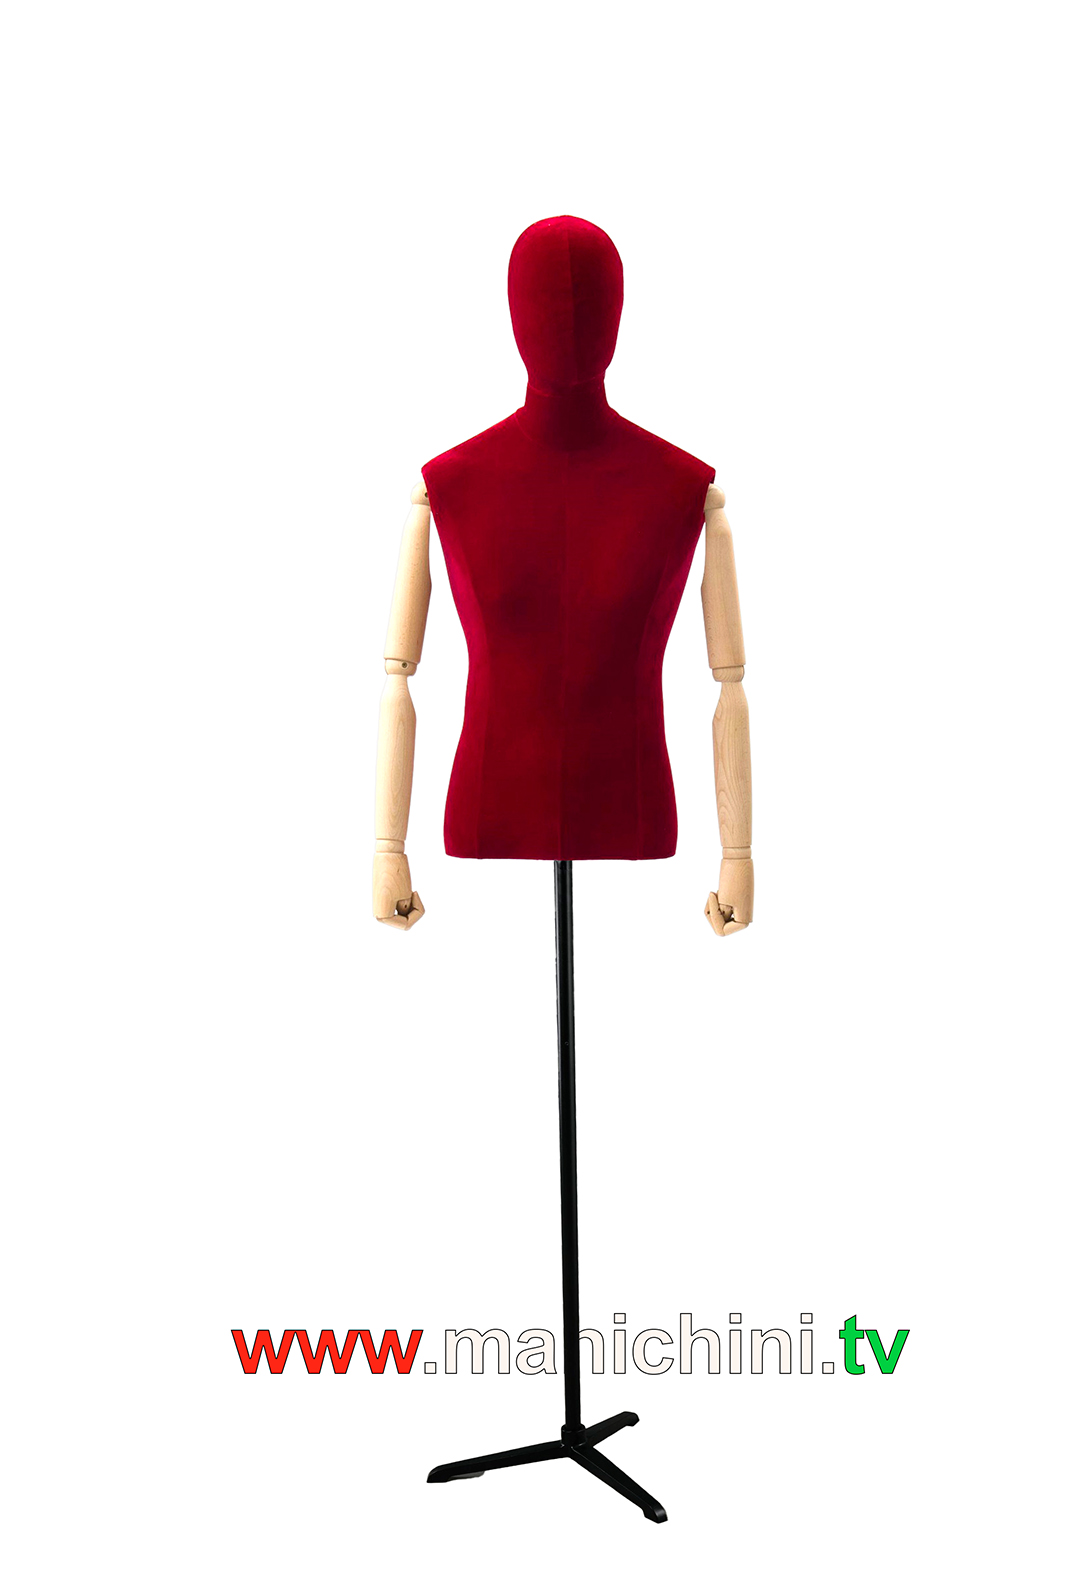 Velvet Upholstered Busts Bust Man Tailored Red Wooden Arms with Head